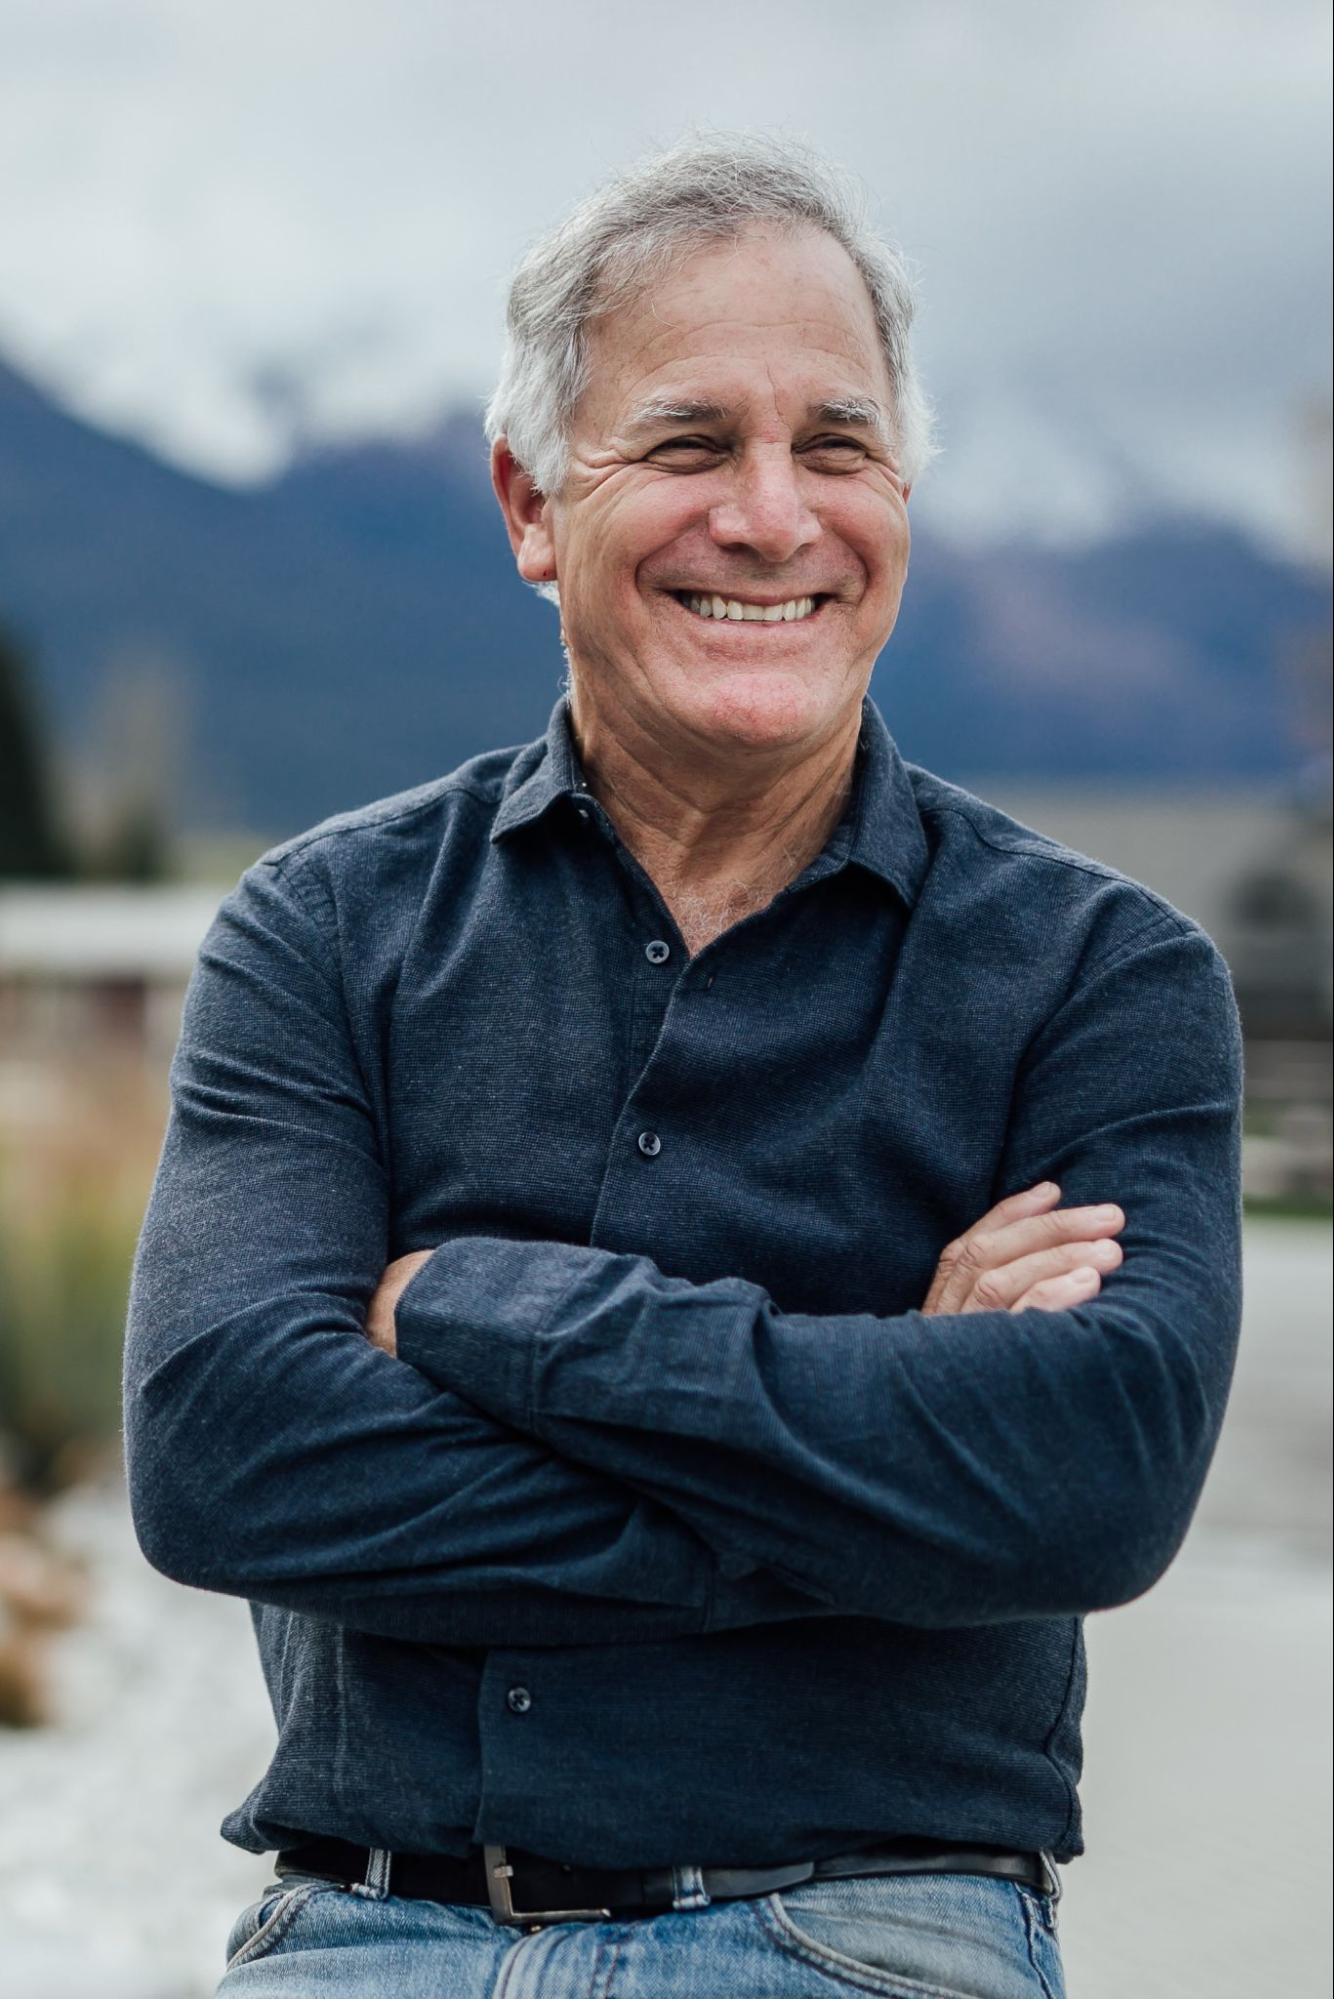 Gary Hirshberg, co-founder of Stonyfield, says he’s never seen a generation so motivated to “do good” at work. (Stonyfield)